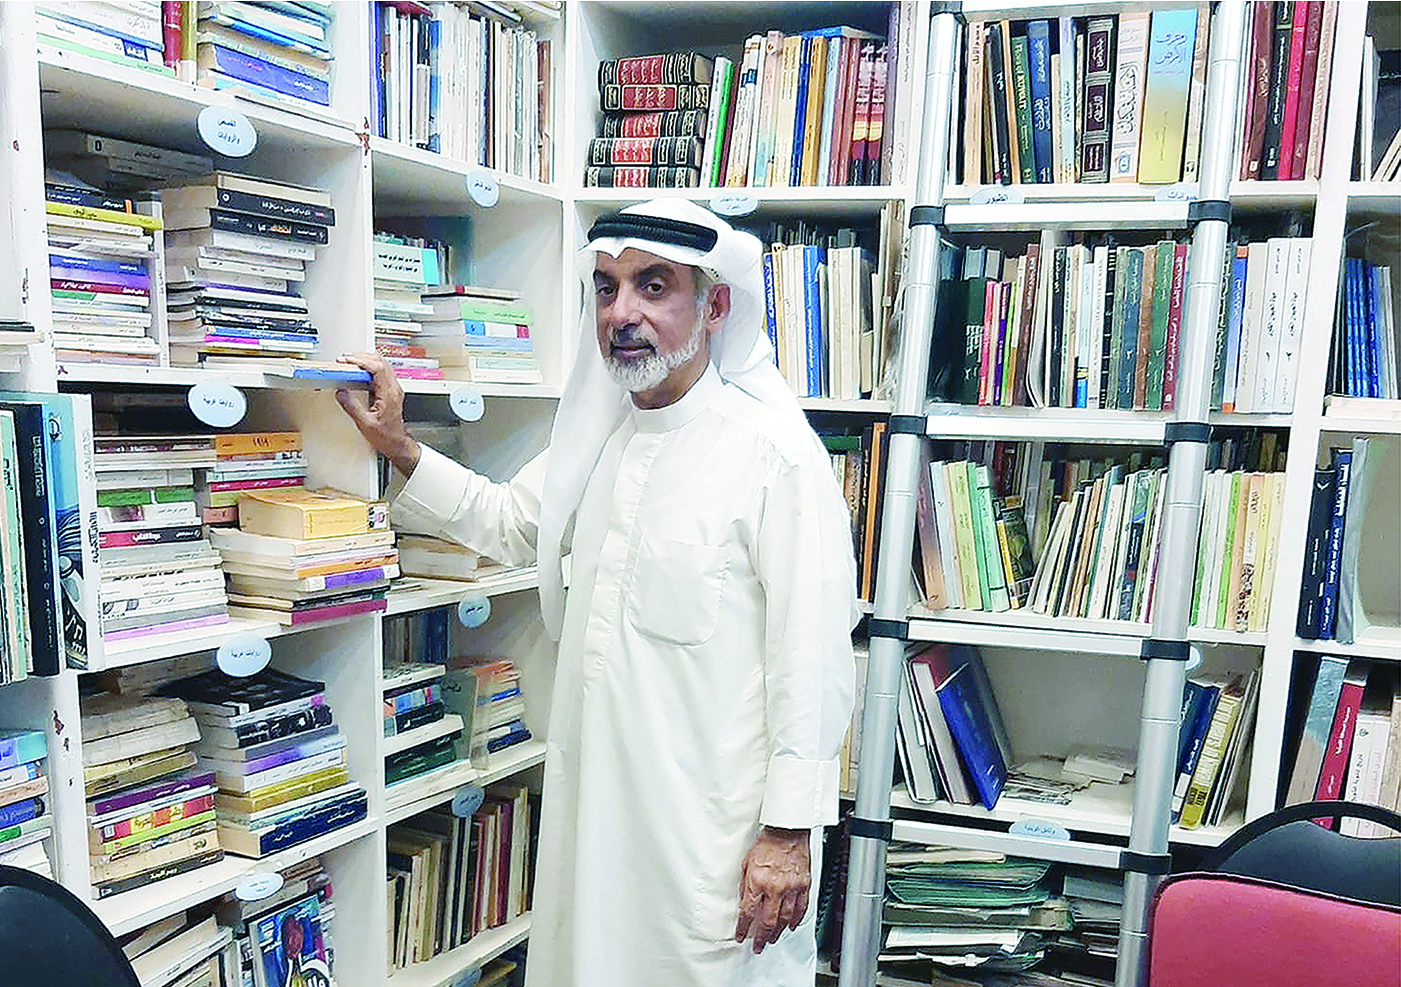 KUWAIT: Saleh Al-Misbah poses with some of his books in the Kuwait Heritage Library. - Photo by Yasser Al-Zayyat